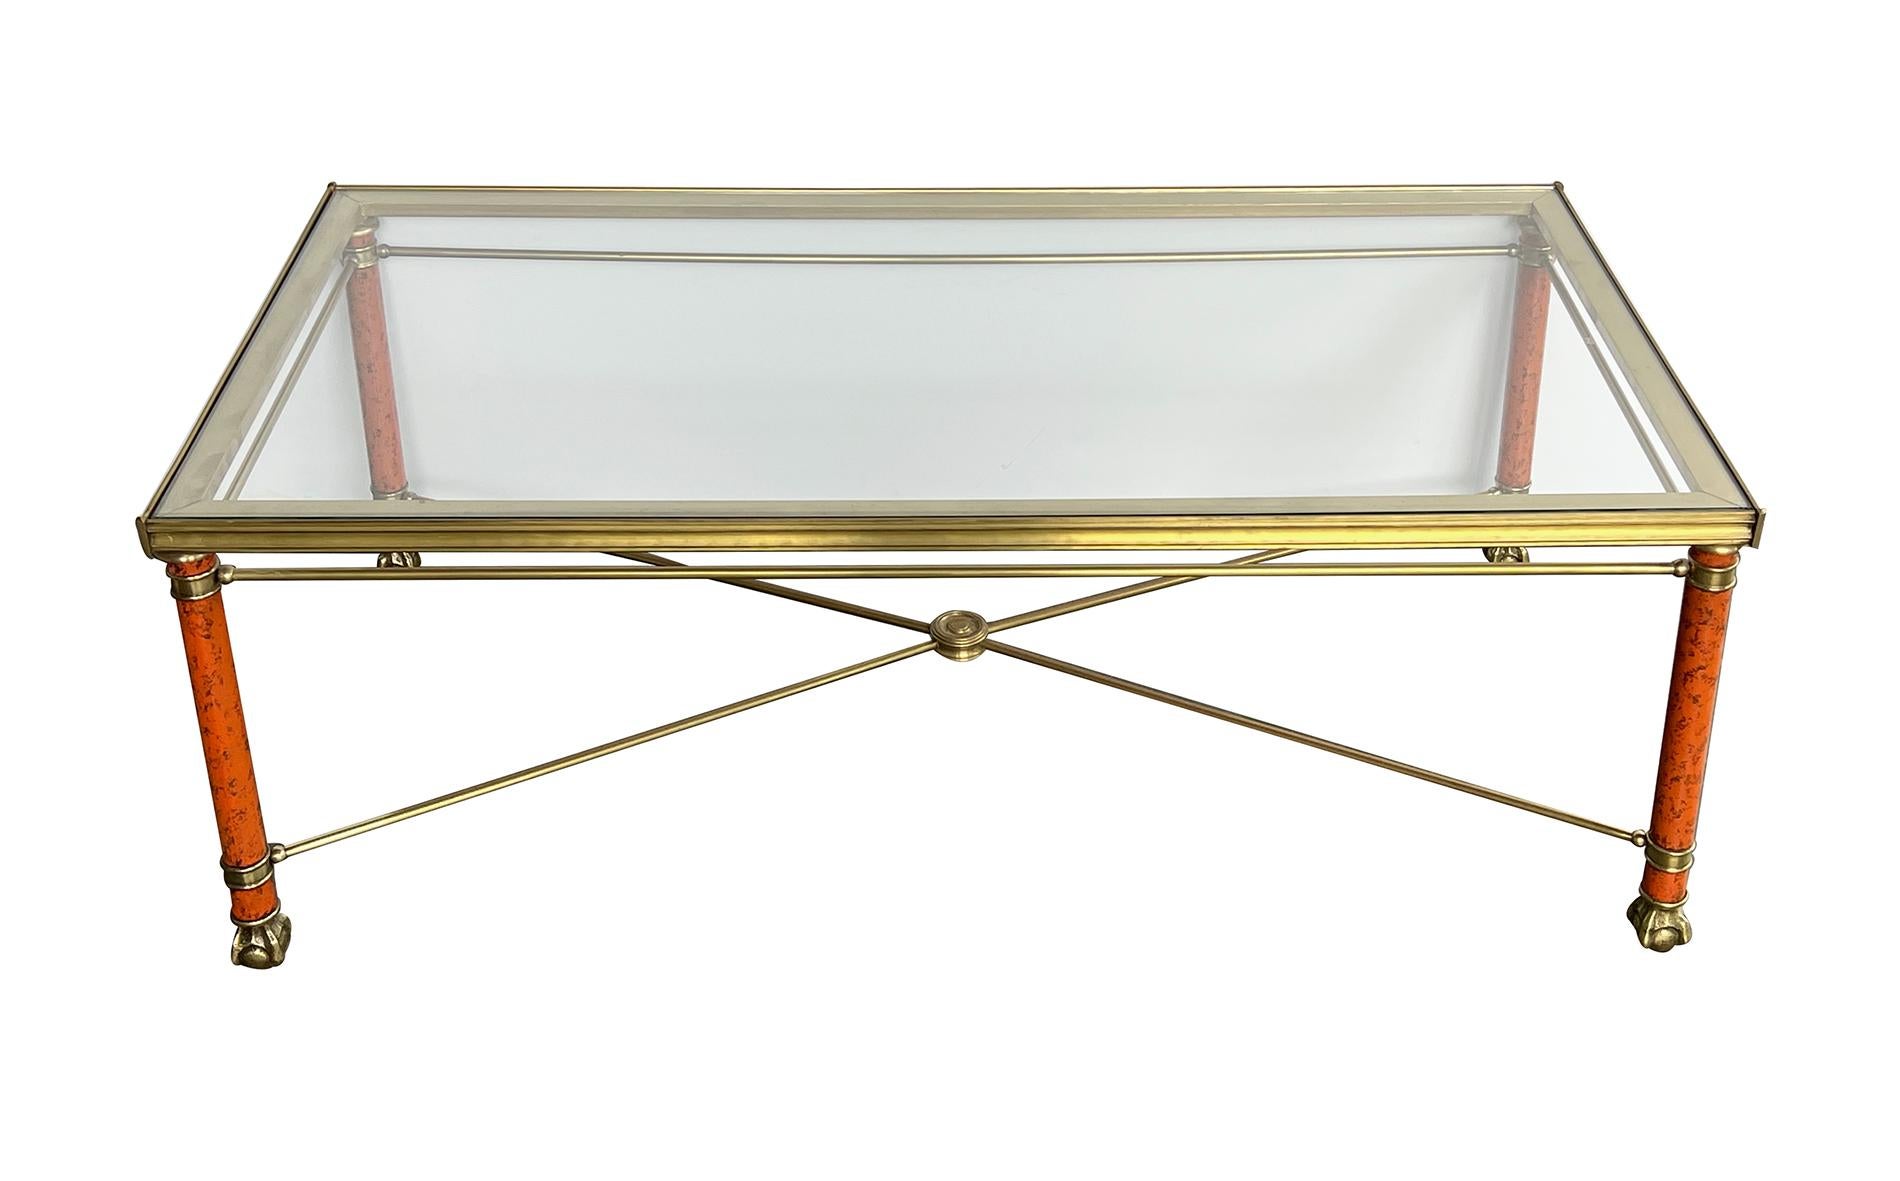 the inset glass top withing a bronze frame raised on cylindrical faux-marble metal supports ending in claw-and-ball feet all joined by an upper perimeter stretcher and lower x-form stretcher